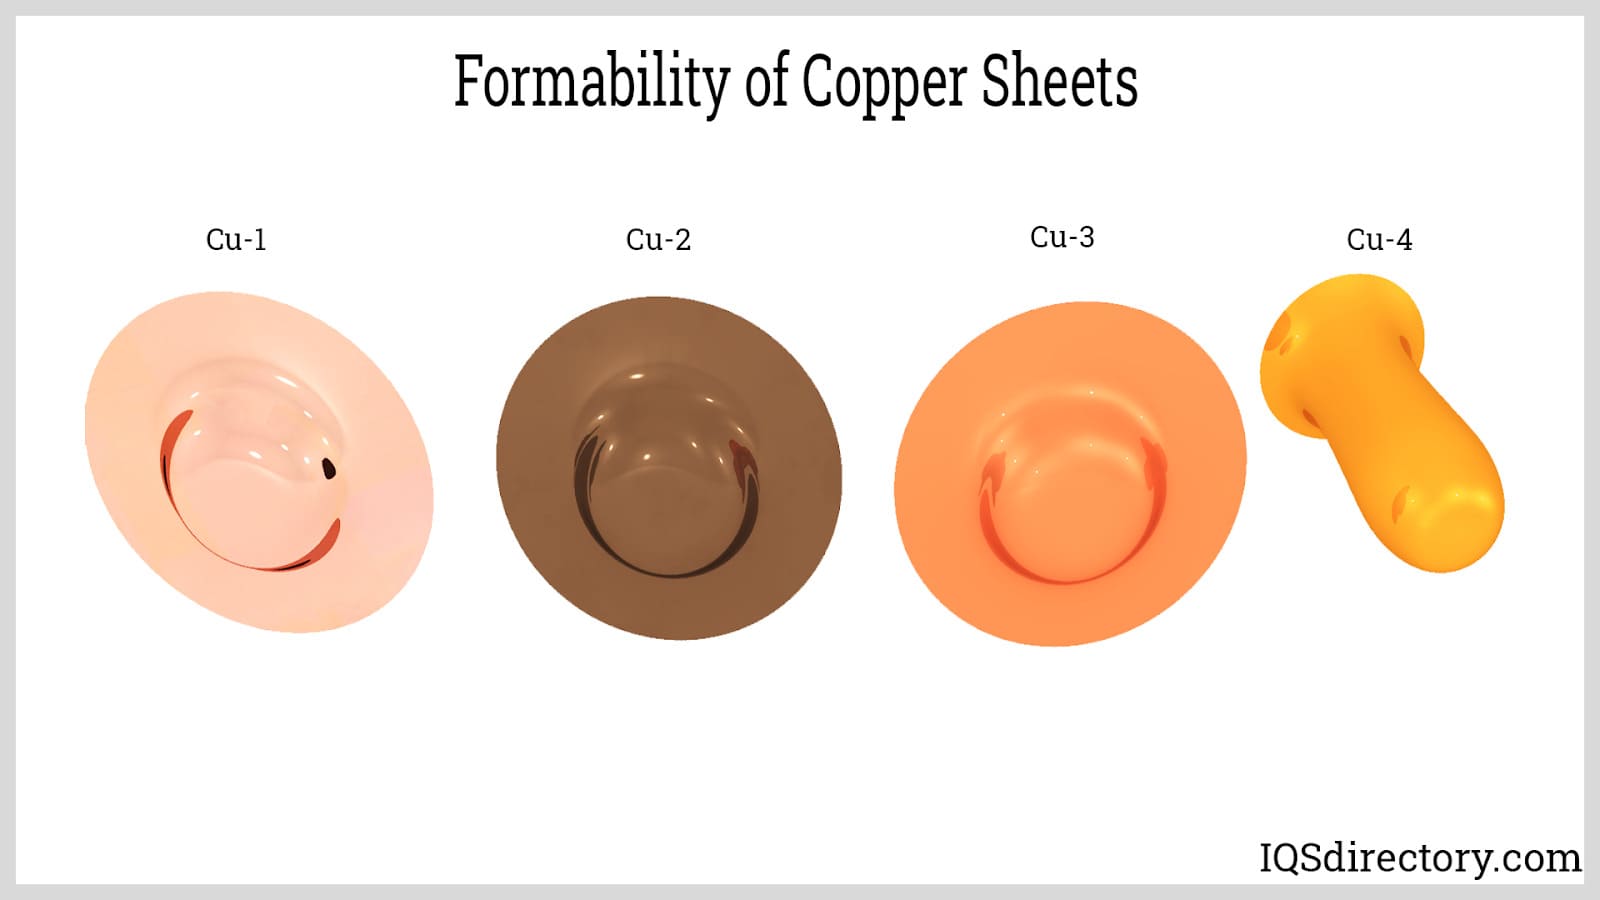 Formability of Copper Sheets